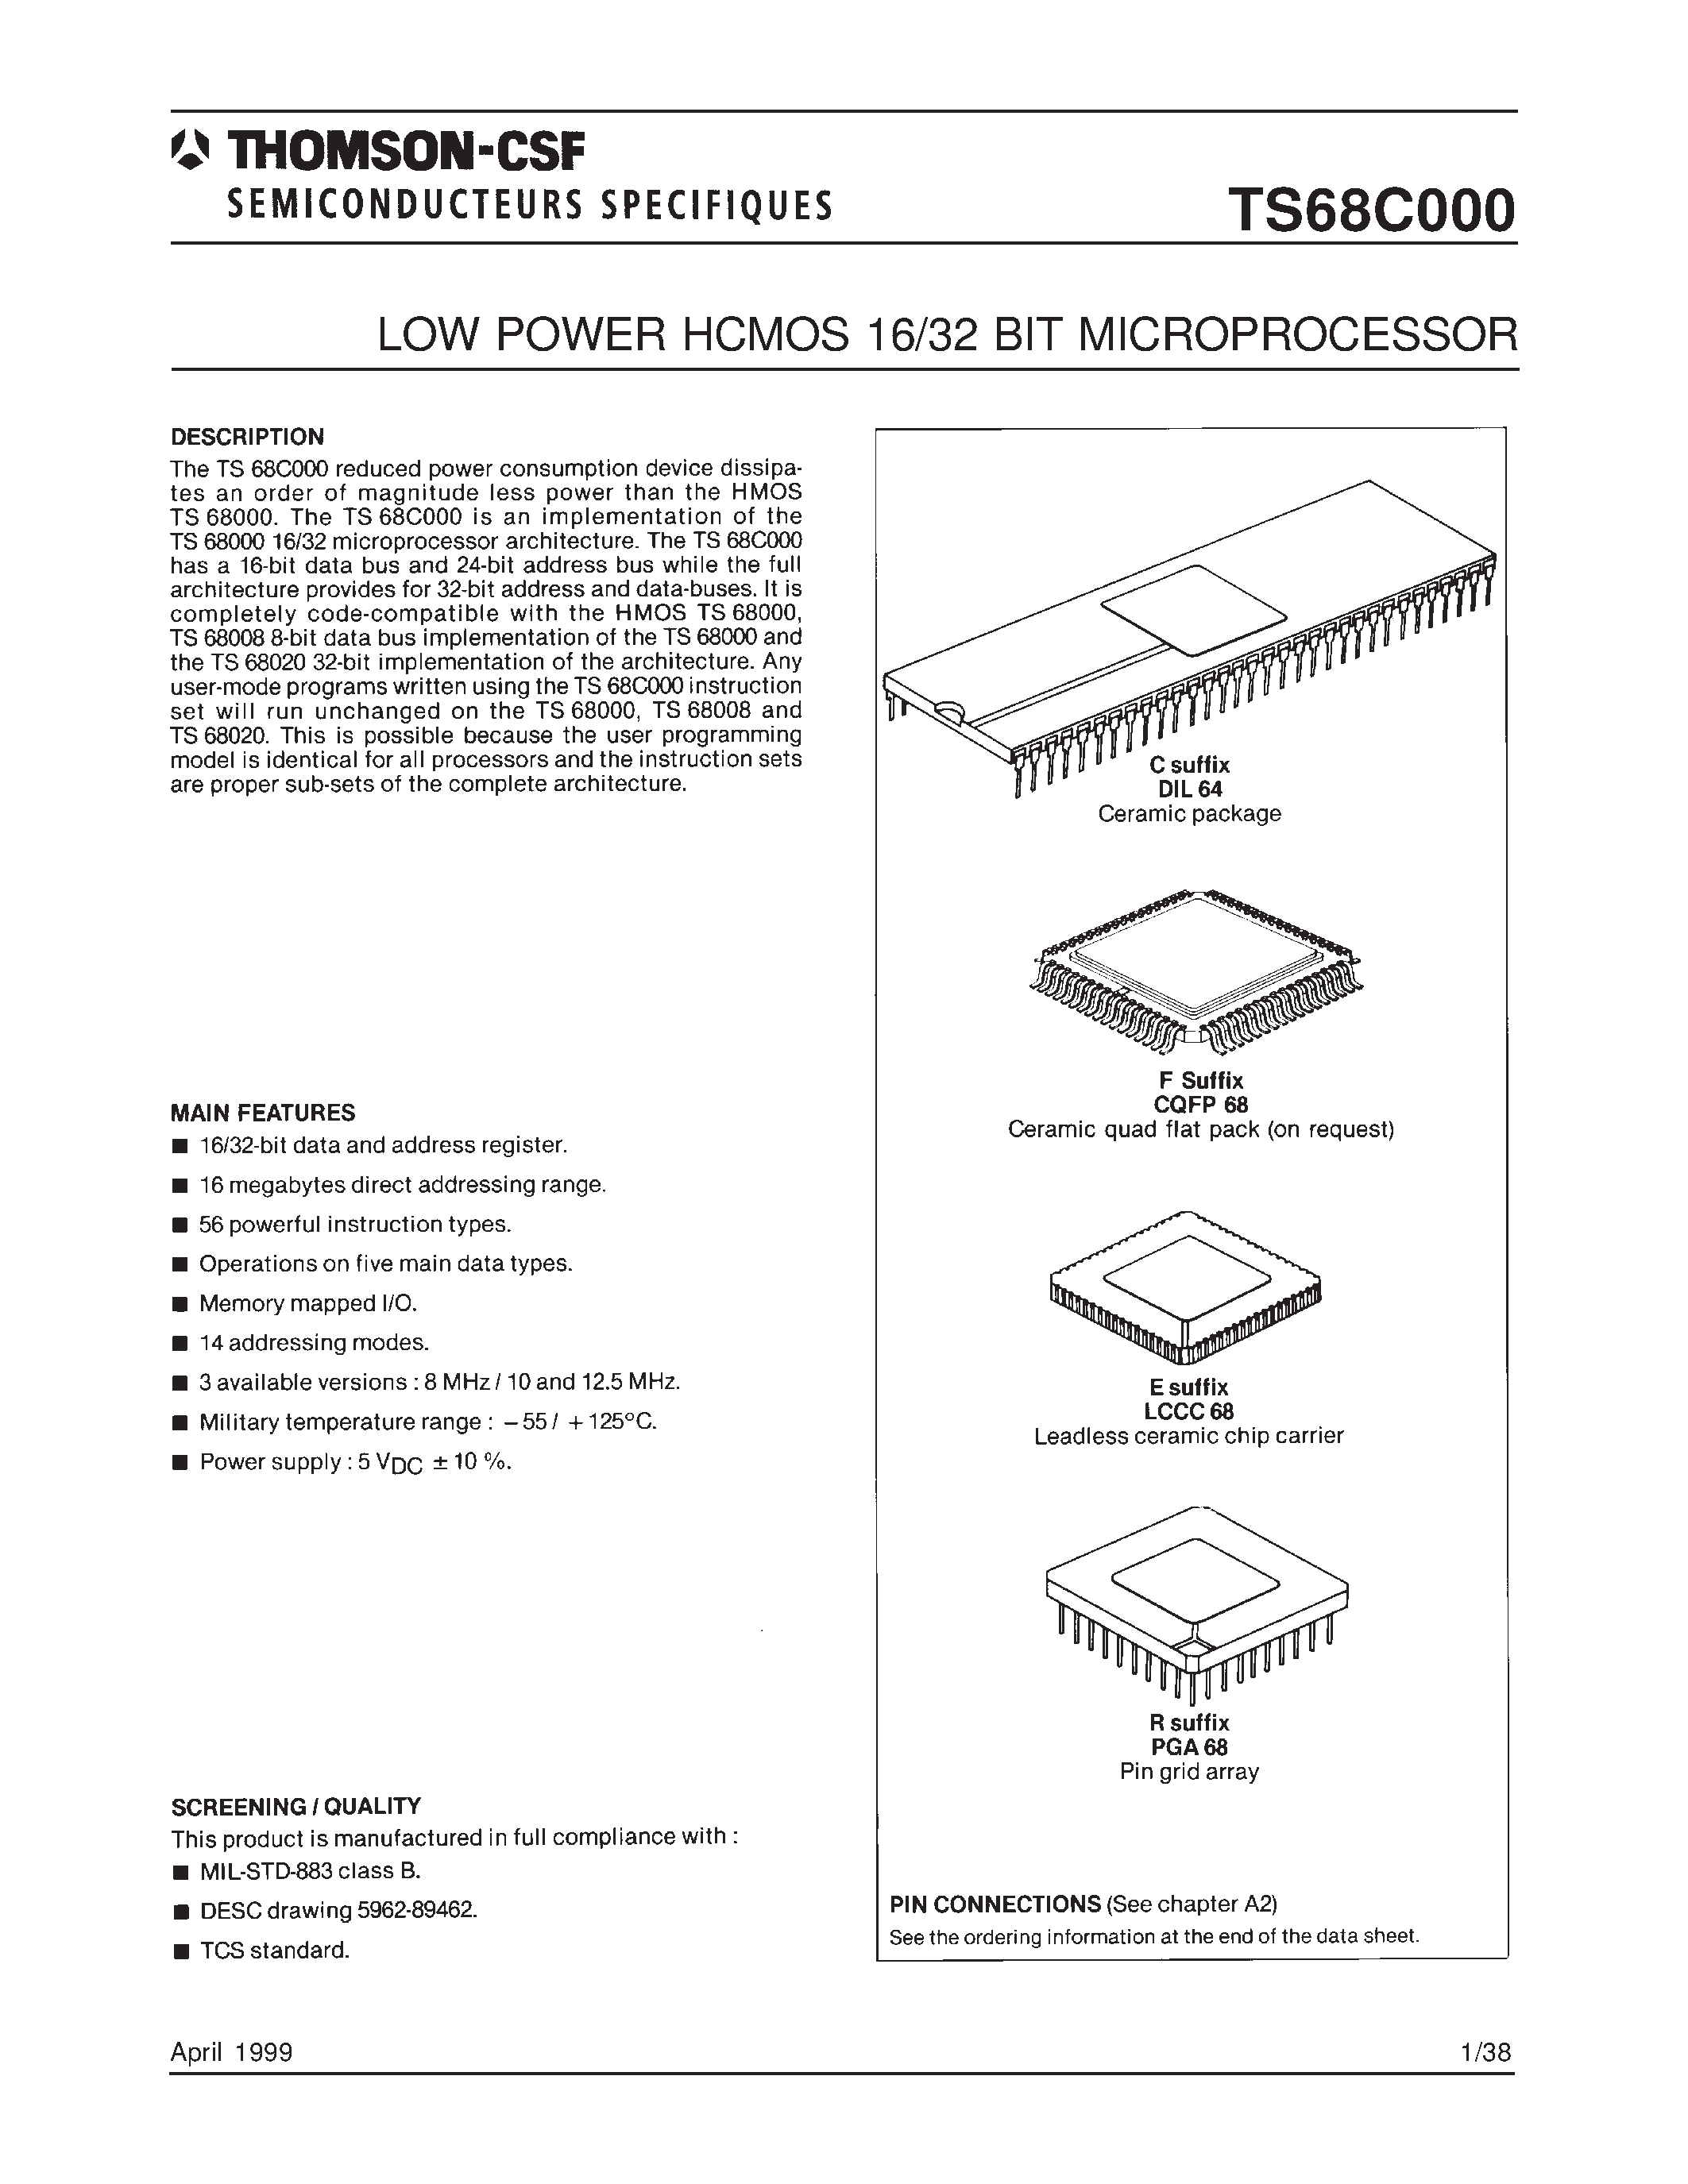 Datasheet TS68C000ME8A - LOW POWER HCMOS 16/32 BIT MICROPROCESSOR page 1